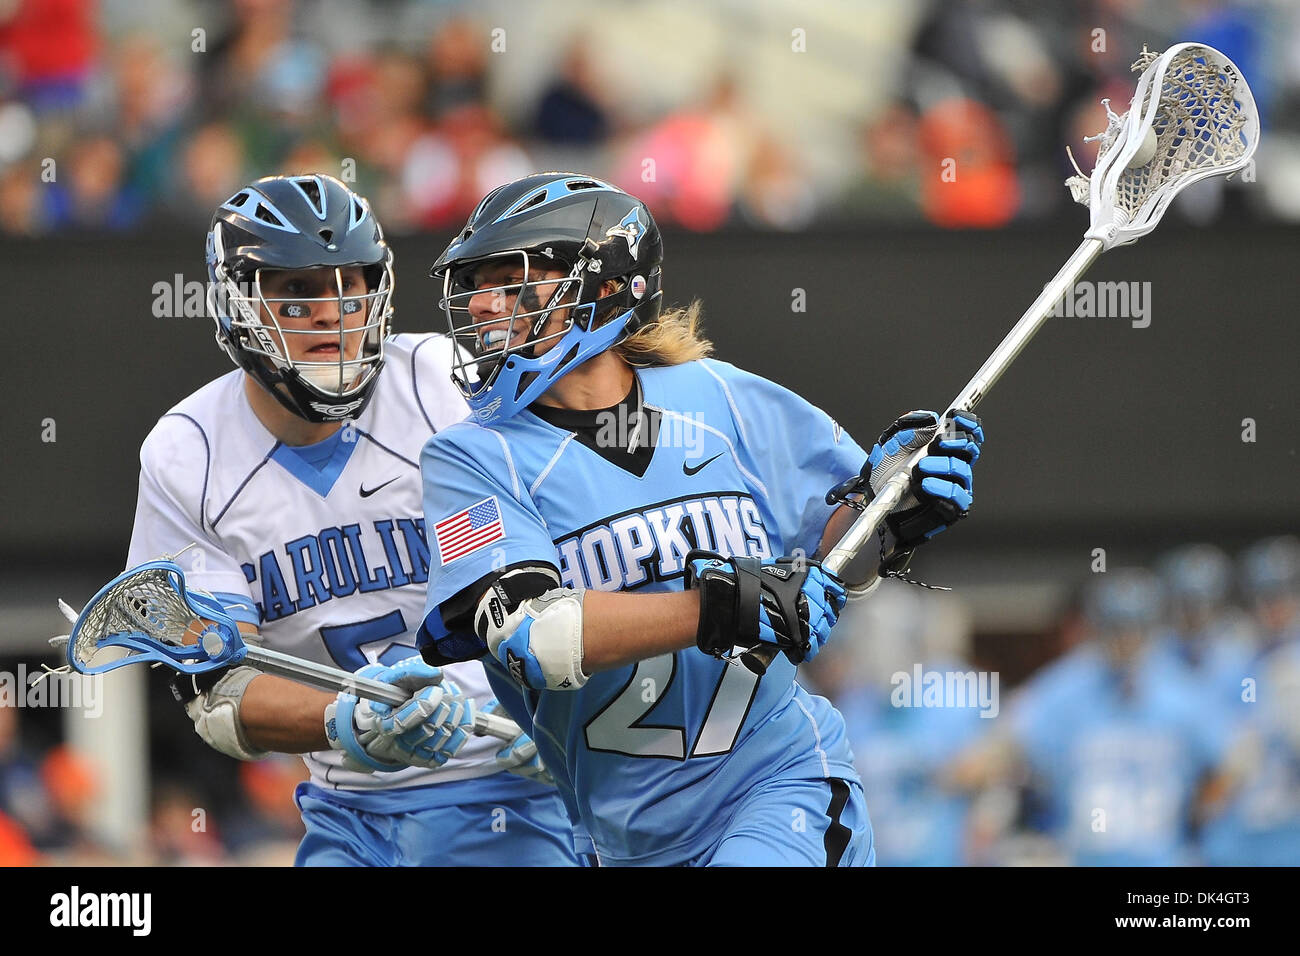 Apr. 3, 2011 - East Rutherford, New Jersey, U.S - UNC Tar Heels Midfielder Chris Hunt (5) and Johns Hopkins Blue Jays Midfielder Rob Guida (27) in action during the Konica Minolta Big City Classic at The New Meadowlands Stadium in East Rutherford New Jersey  Johns Hopkins defeats UNC 10 to 9 (Credit Image: © Brooks Von Arx/Southcreek Global/ZUMAPRESS.com) Stock Photo